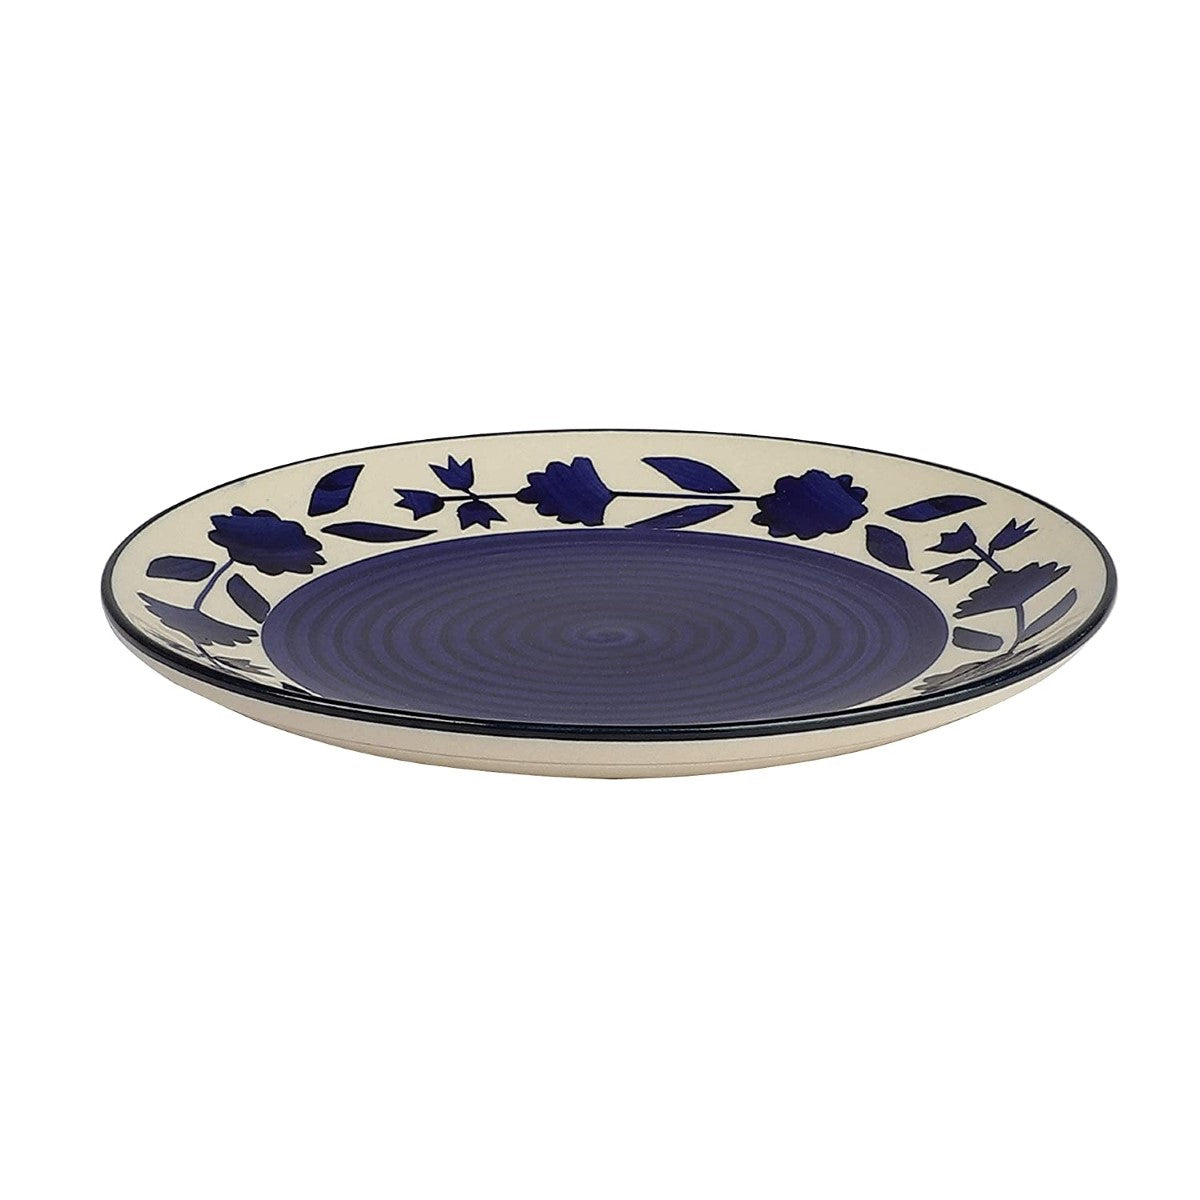 Floral Blue And White Ceramic Plates For Dinner (Set of 4)